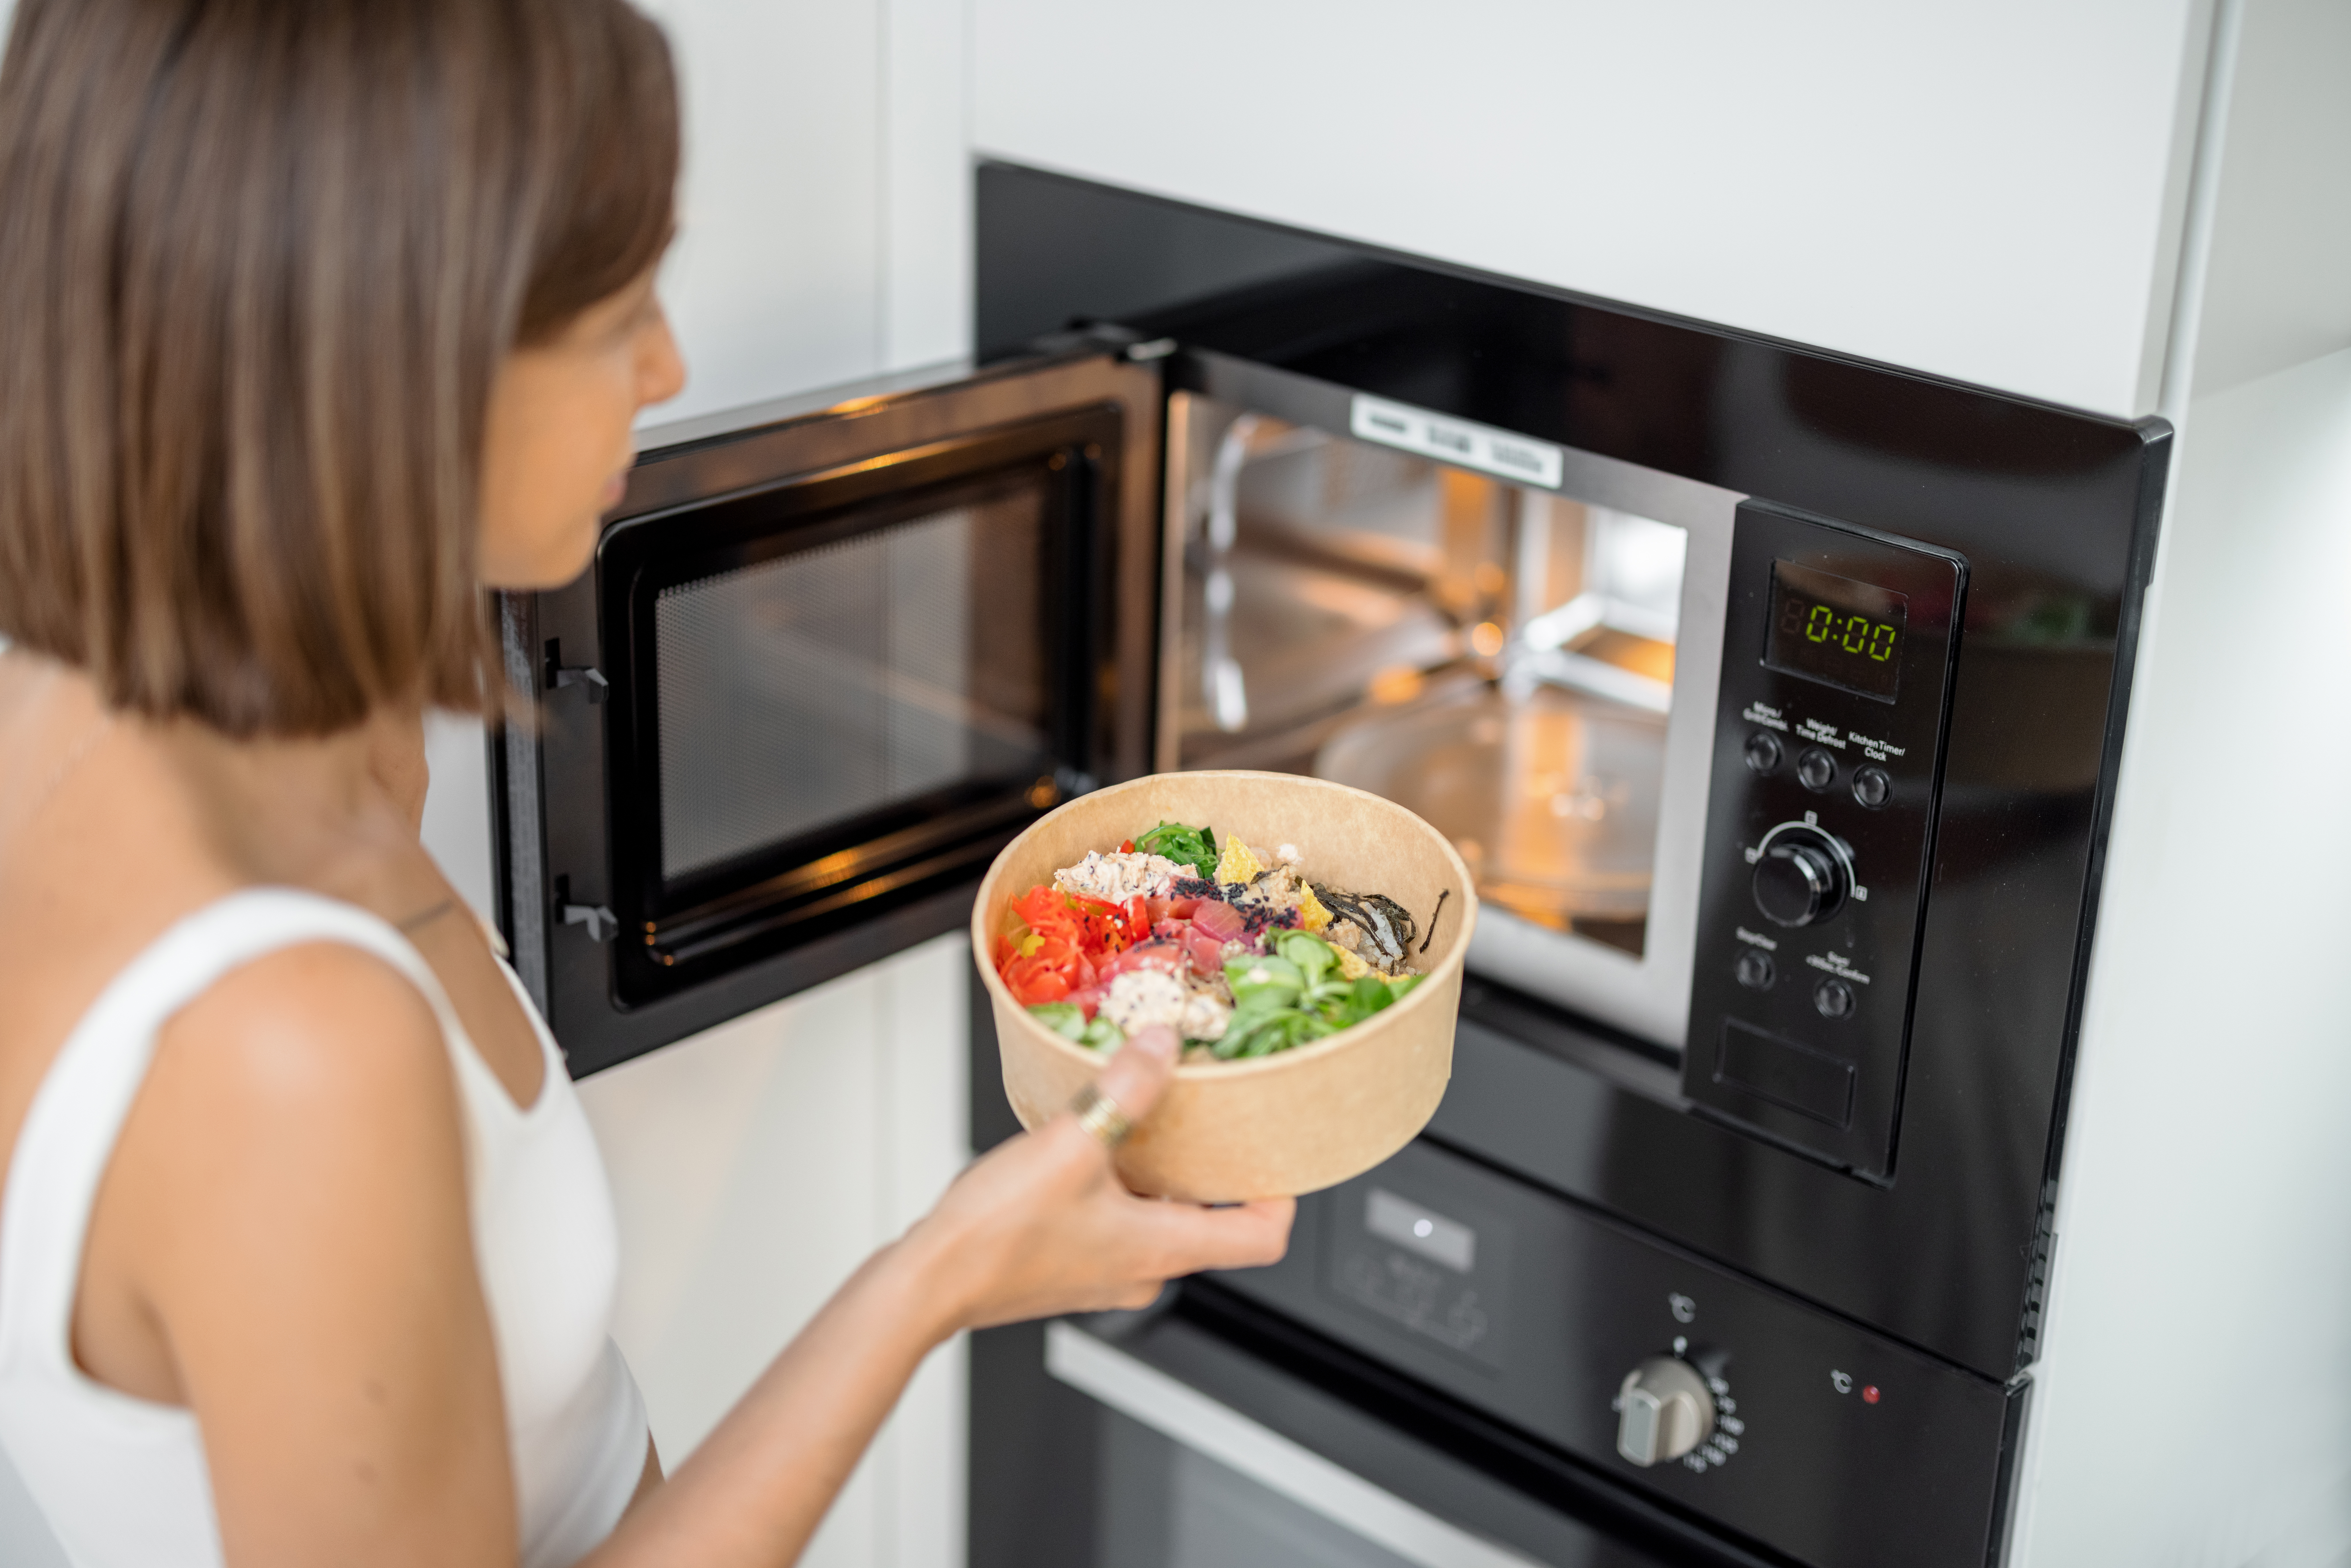 The Complete Guide to Cooking Food in the Microwave